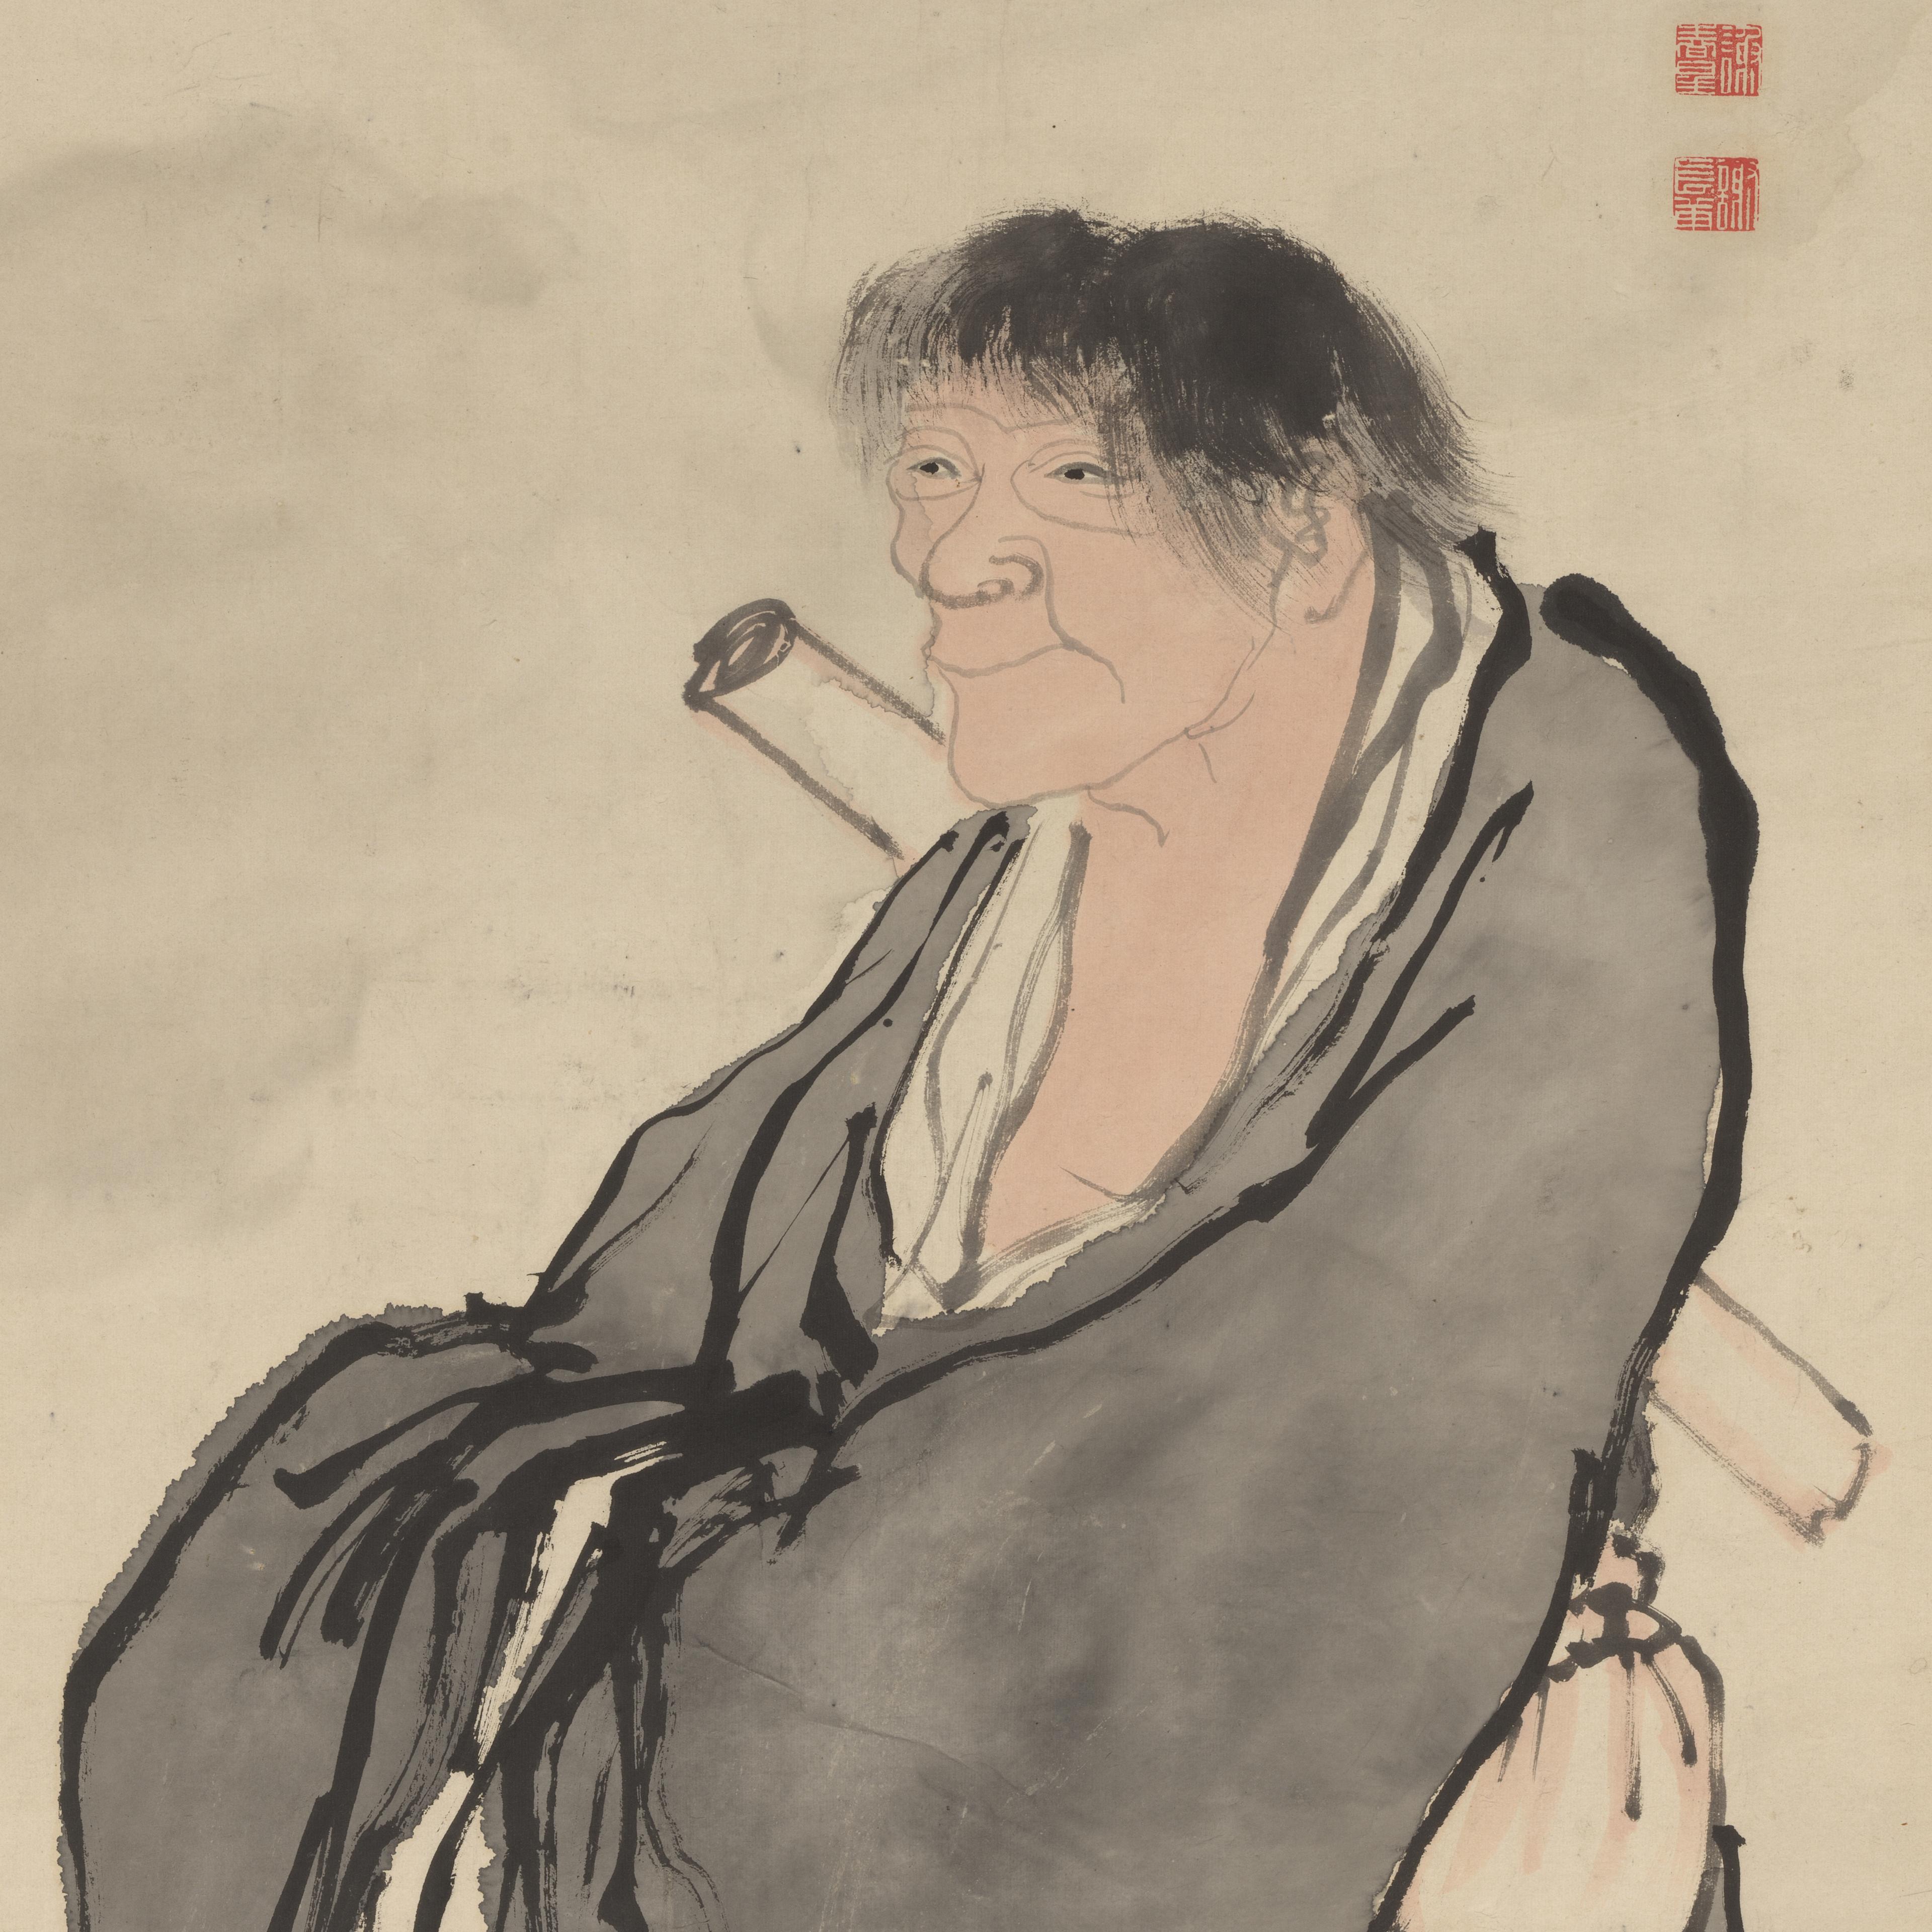 Paining of an older gentleman, sitting in a chair, with a scroll under his garment.